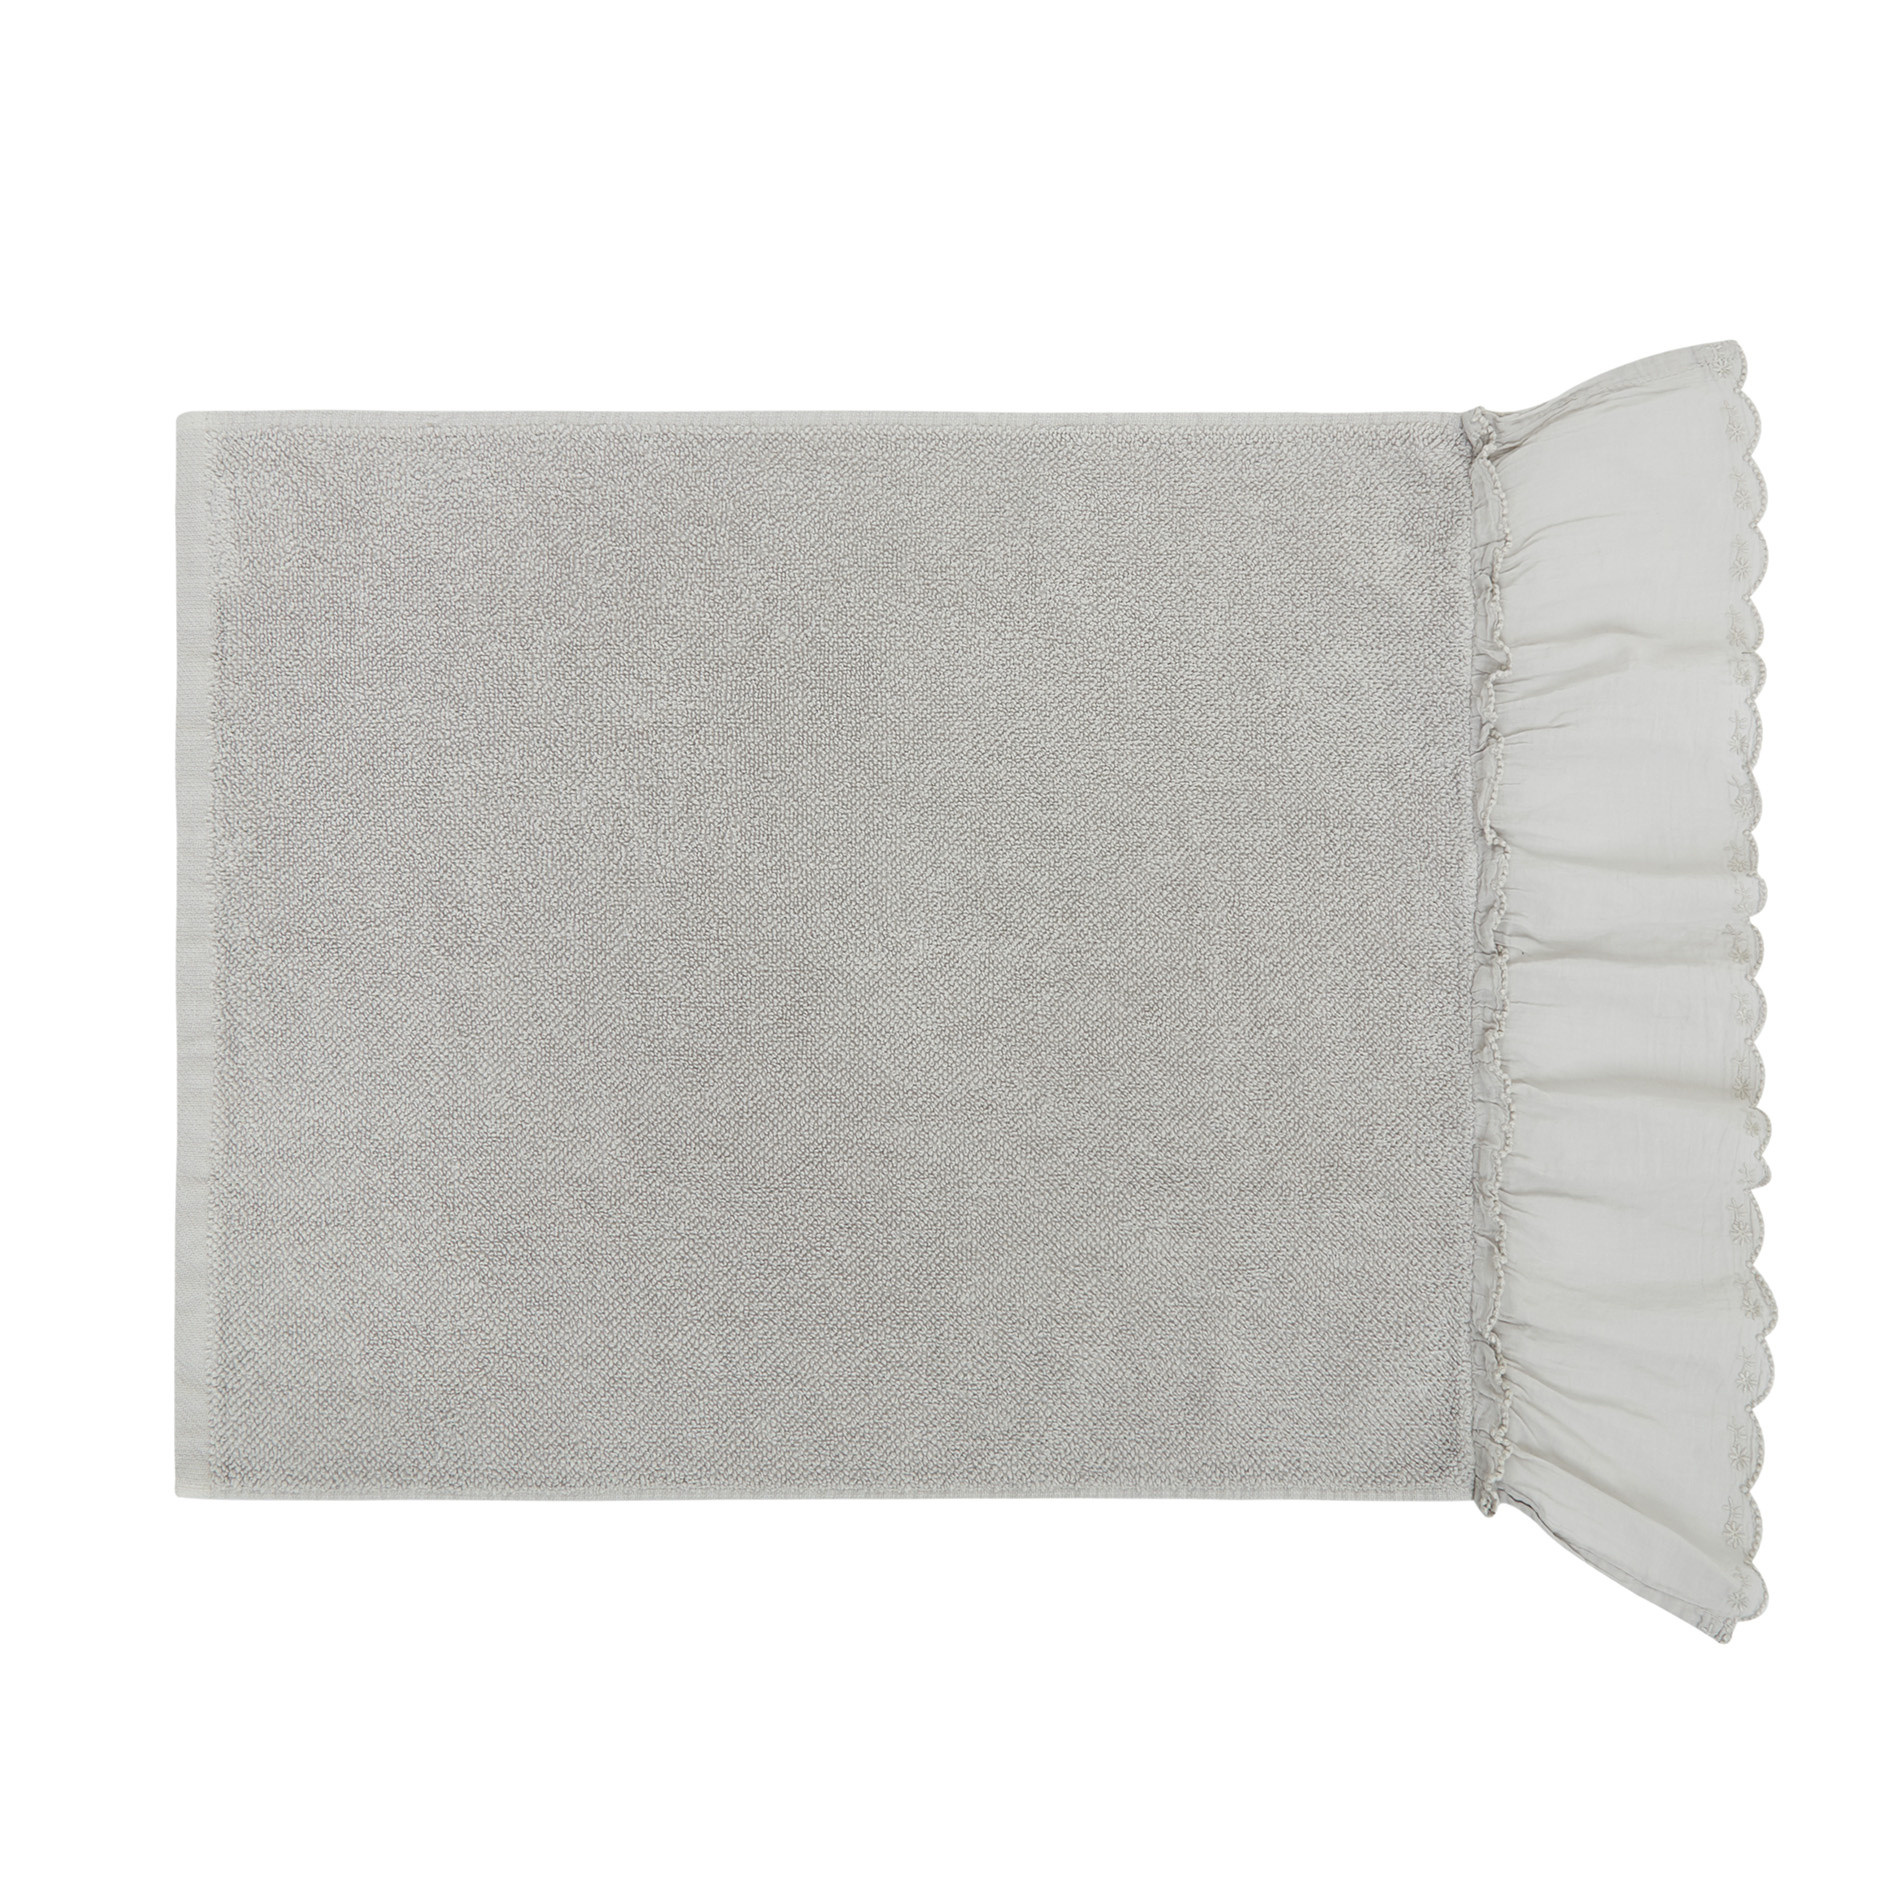 Portofino cotton towel with voile edge, Light Grey, large image number 2